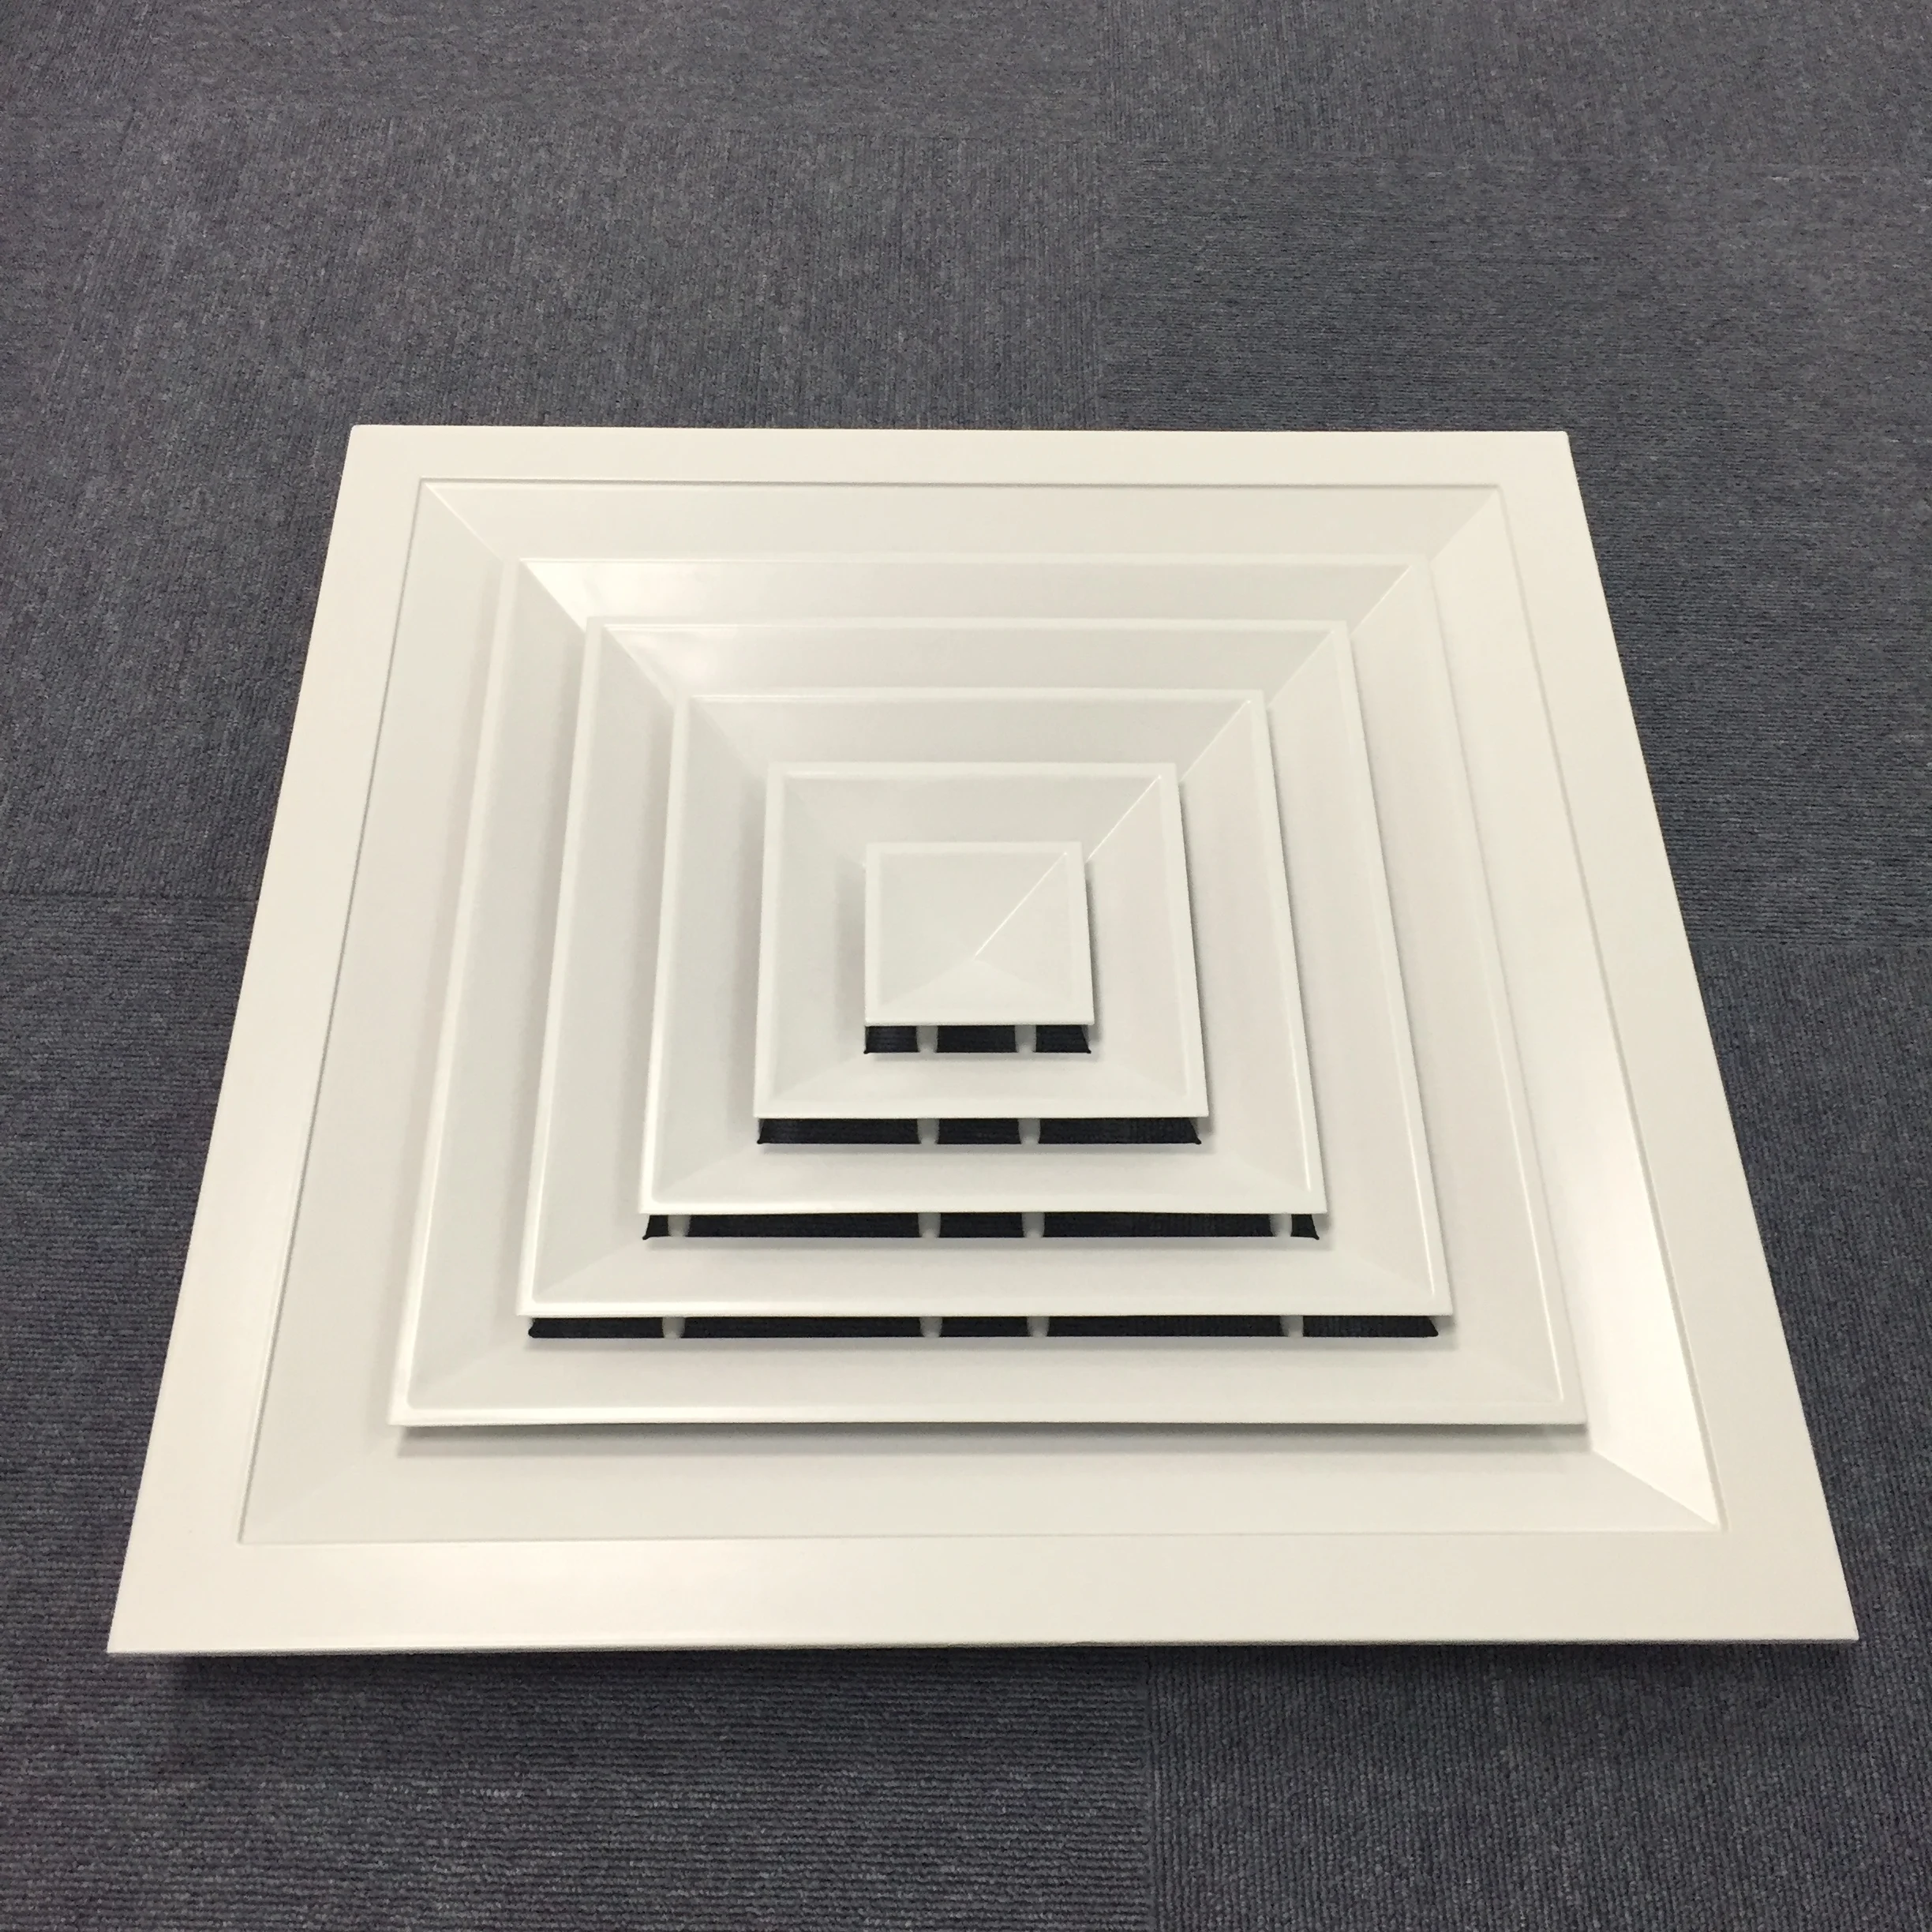 Construction flexible duct ventilation air inlet 4 way diffuser